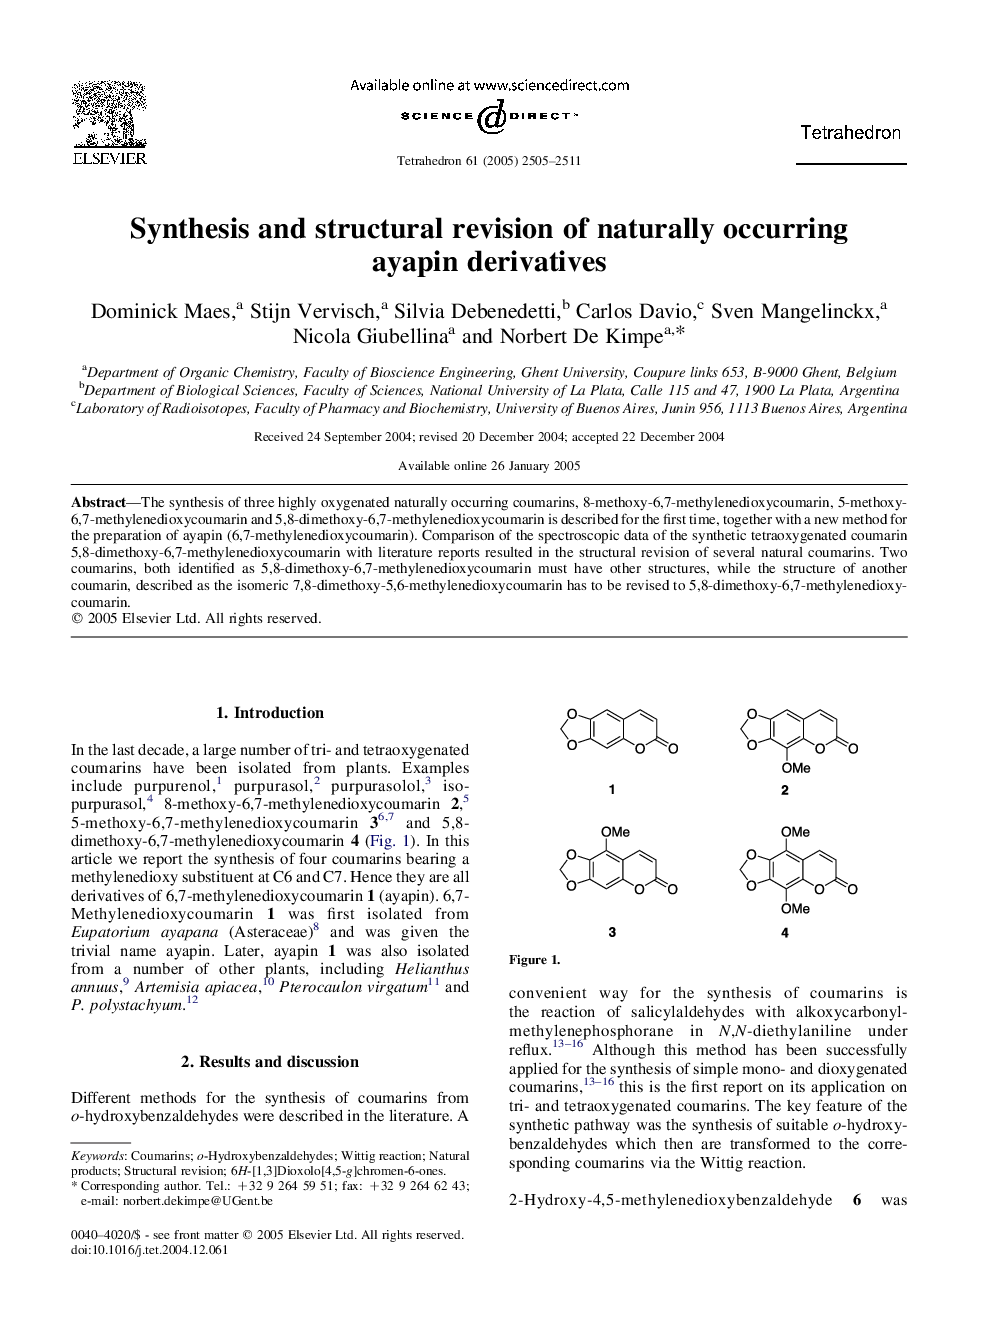 Synthesis and structural revision of naturally occurring ayapin derivatives